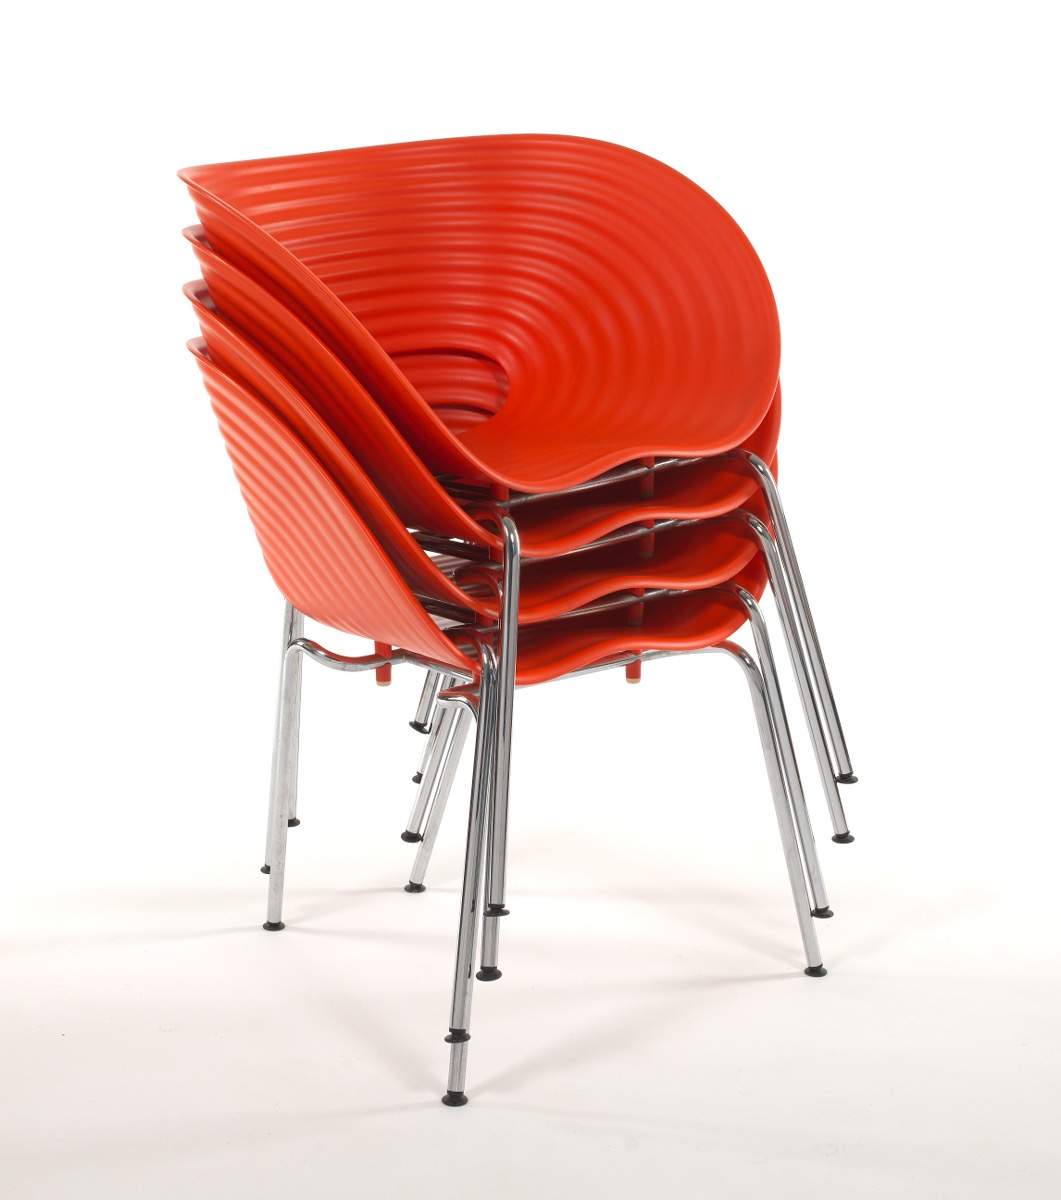 Four Ron Arad "Tom Vac" Chairs Designed for Vitra - Image 15 of 17